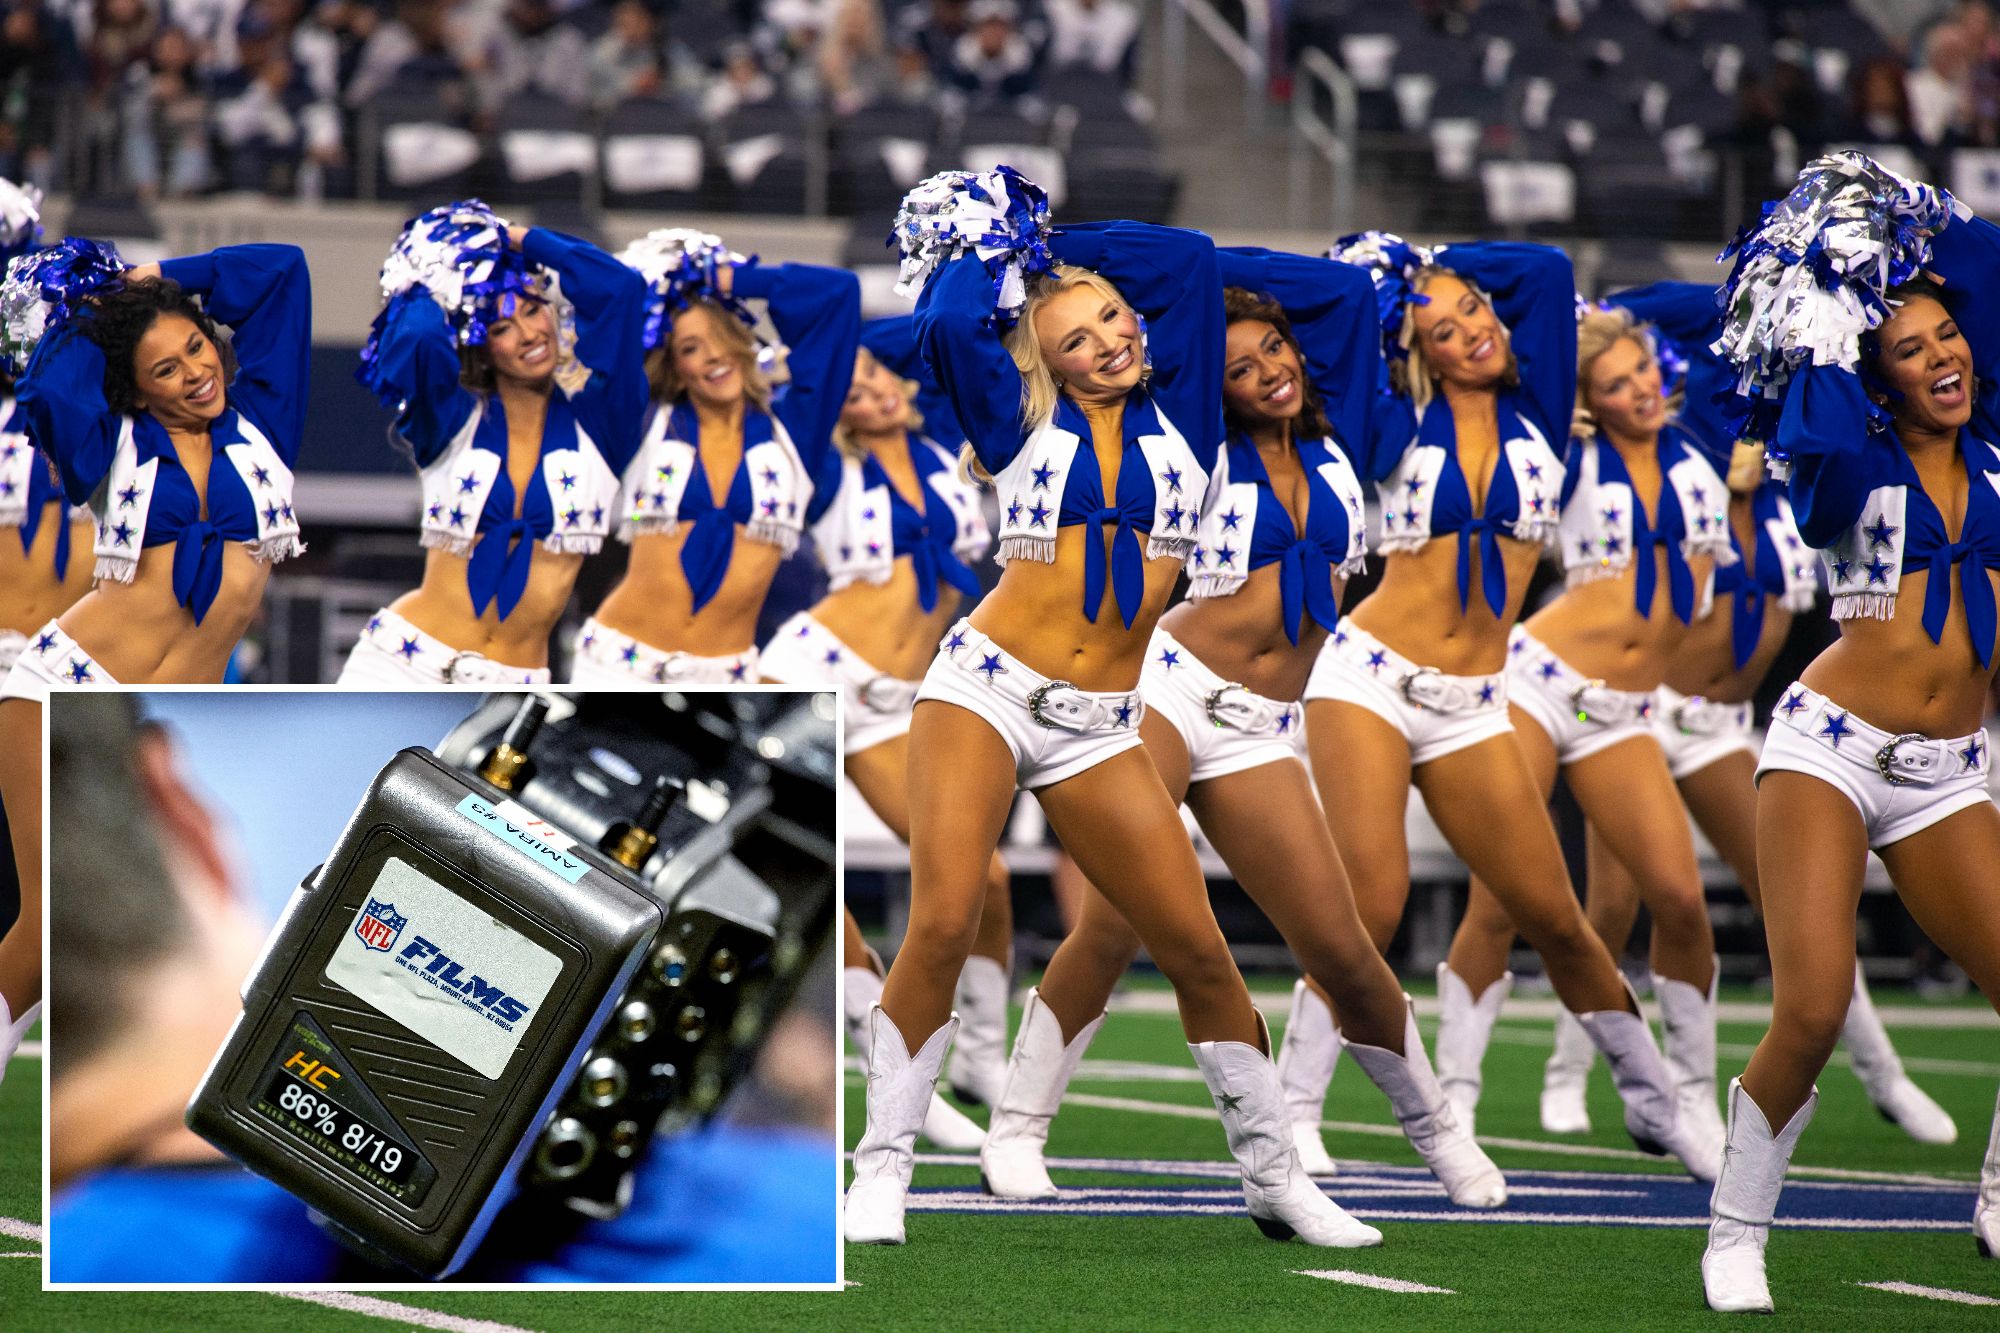 andra bailey recommends nfl cheerleader nipple slips pic